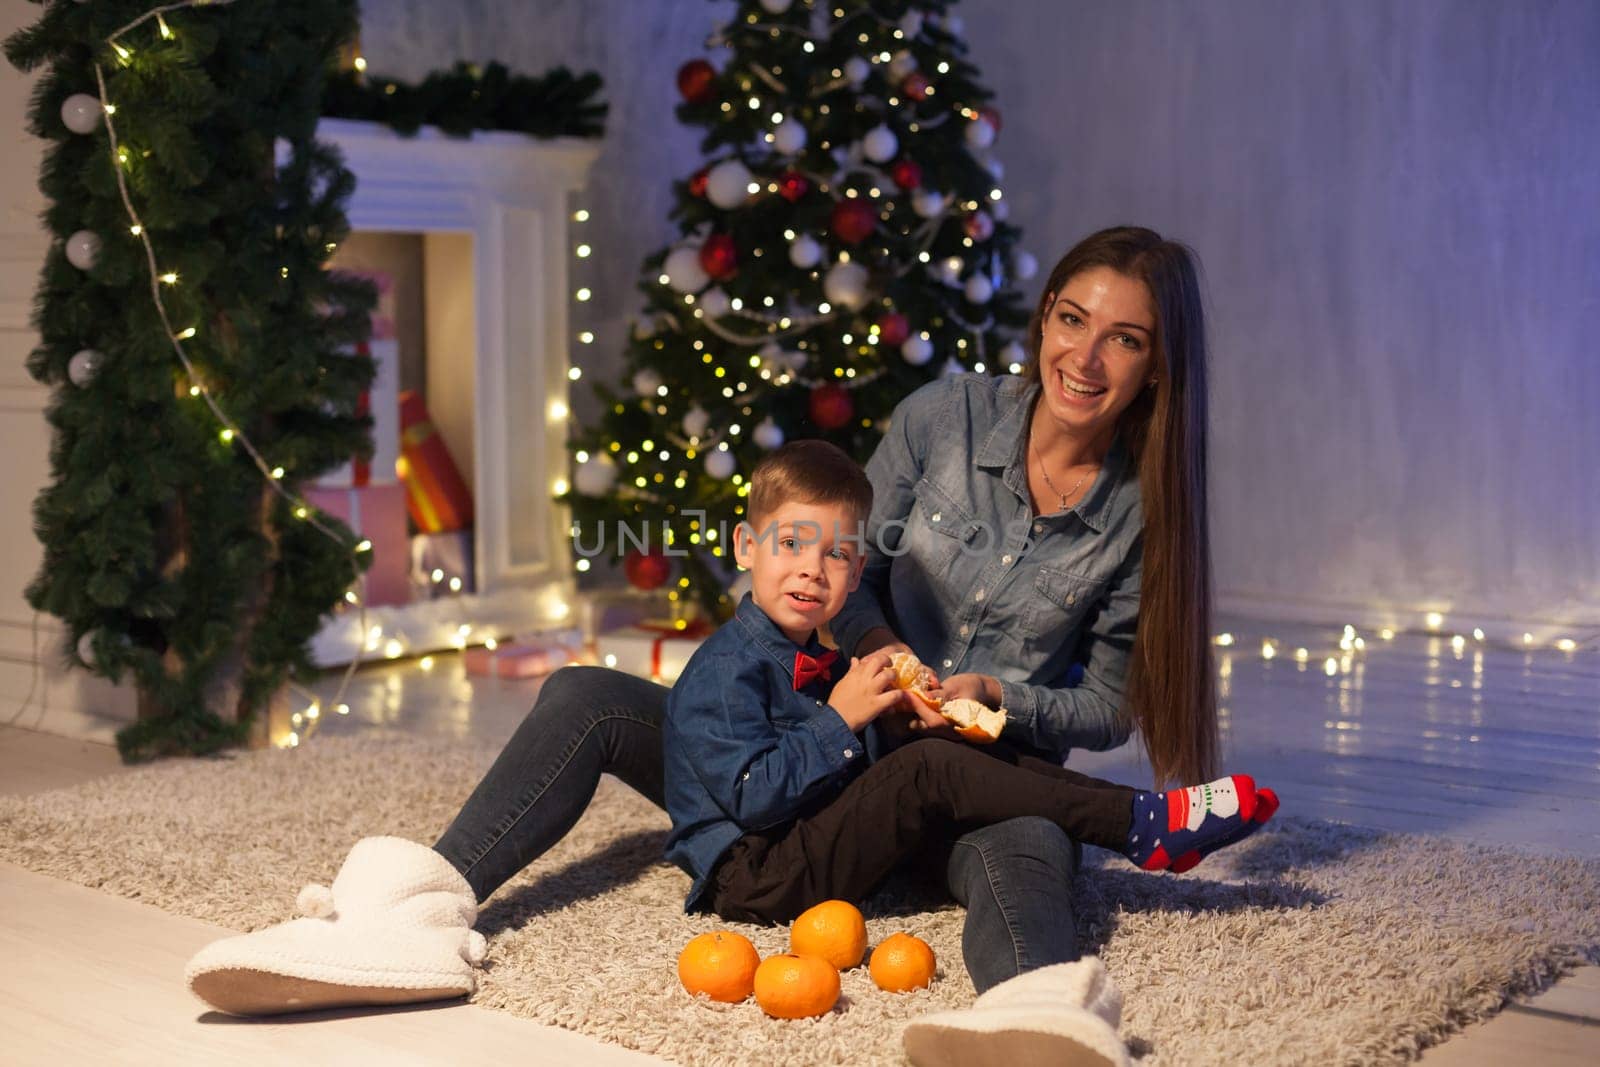 Mom and son on New Year's Eve at Christmas tree gifts lights